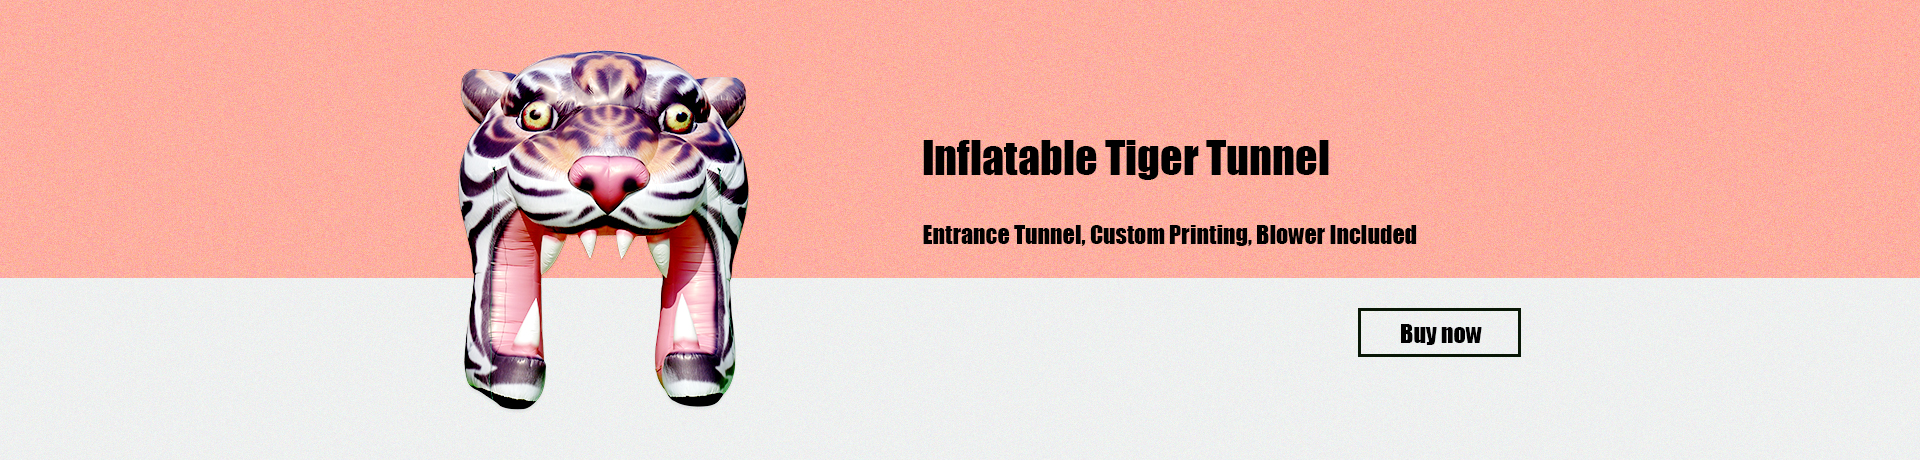 inflatable tiger arch 1920